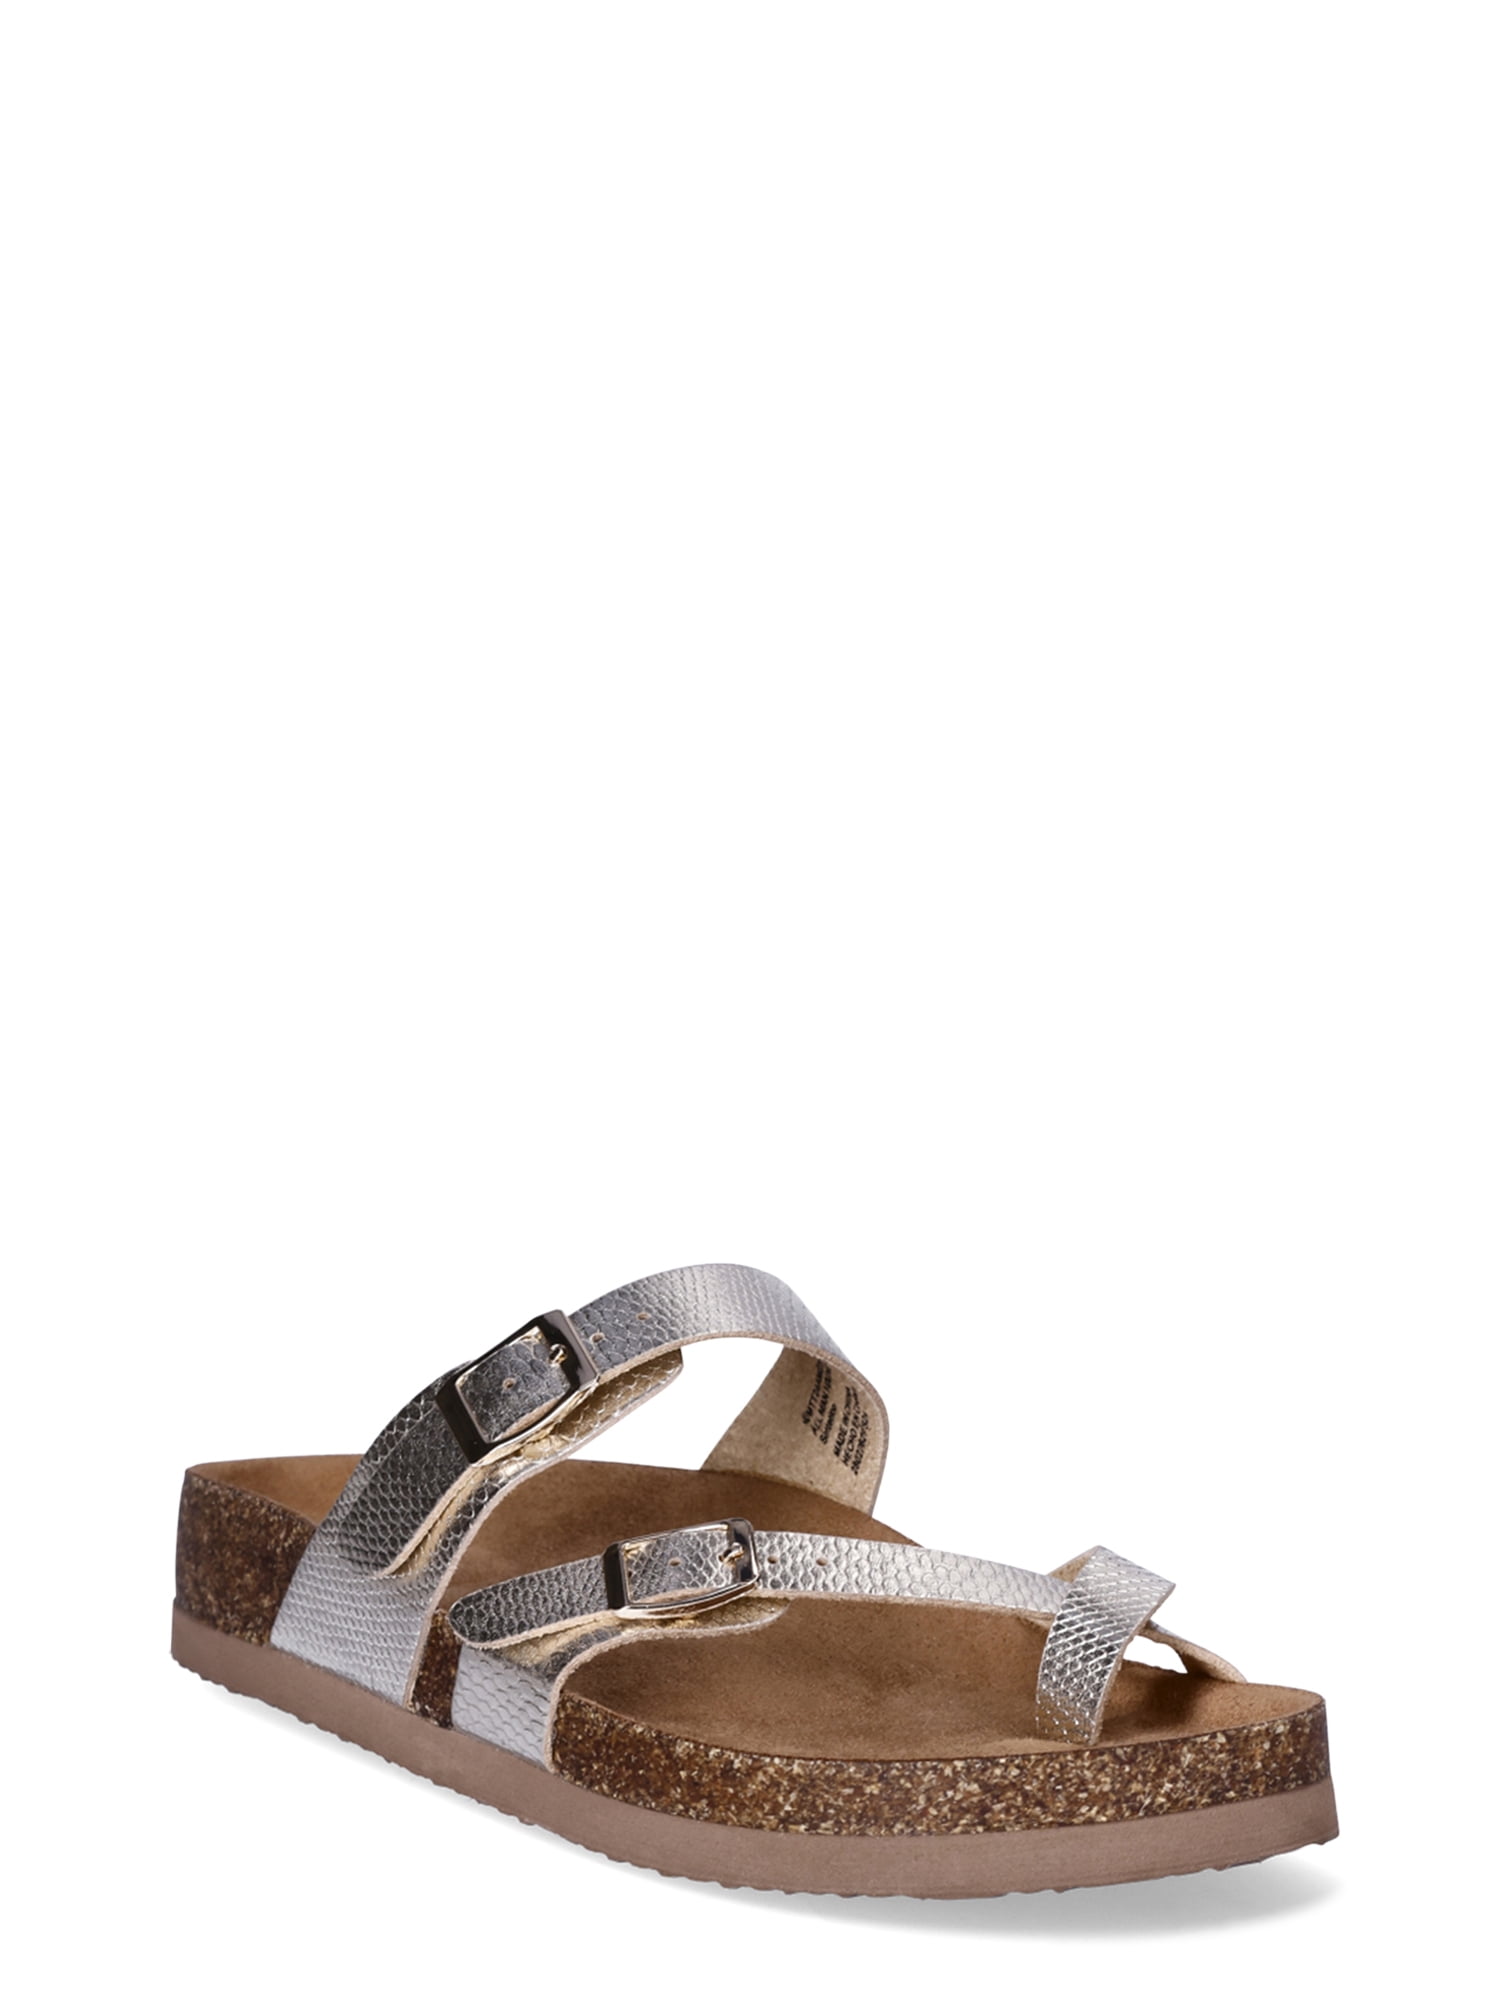 Time and Tru Women's Asymmetric Strap Footbed Sandals, Sizes 6-11, Wide ...